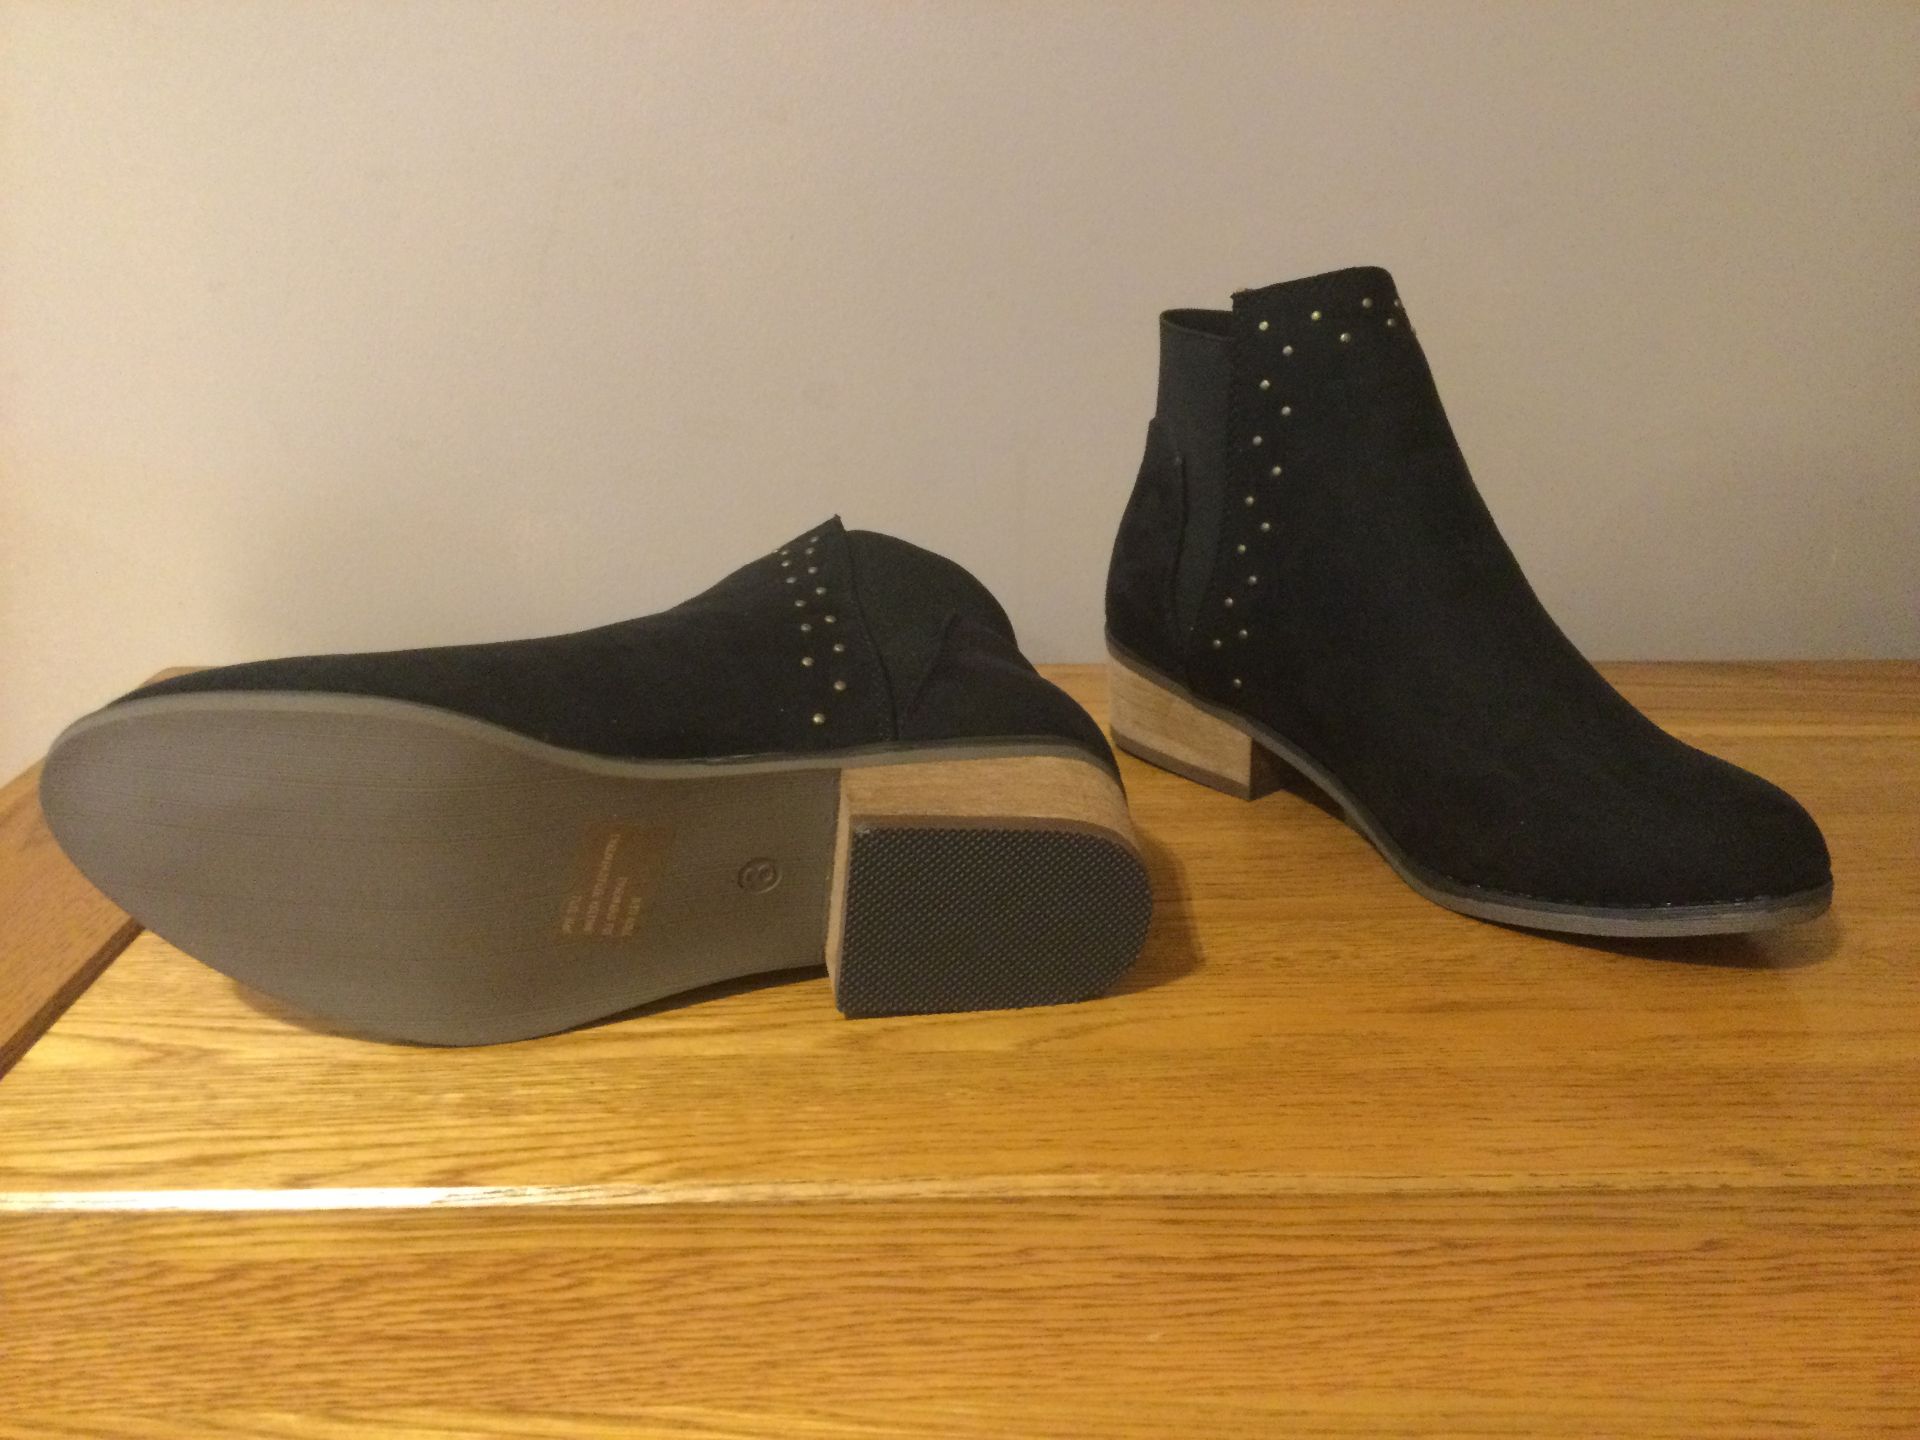 Dolcis “Wendy” Low Heel Ankle Boots, Size 6, Black - New RRP £45.99 - Image 5 of 7